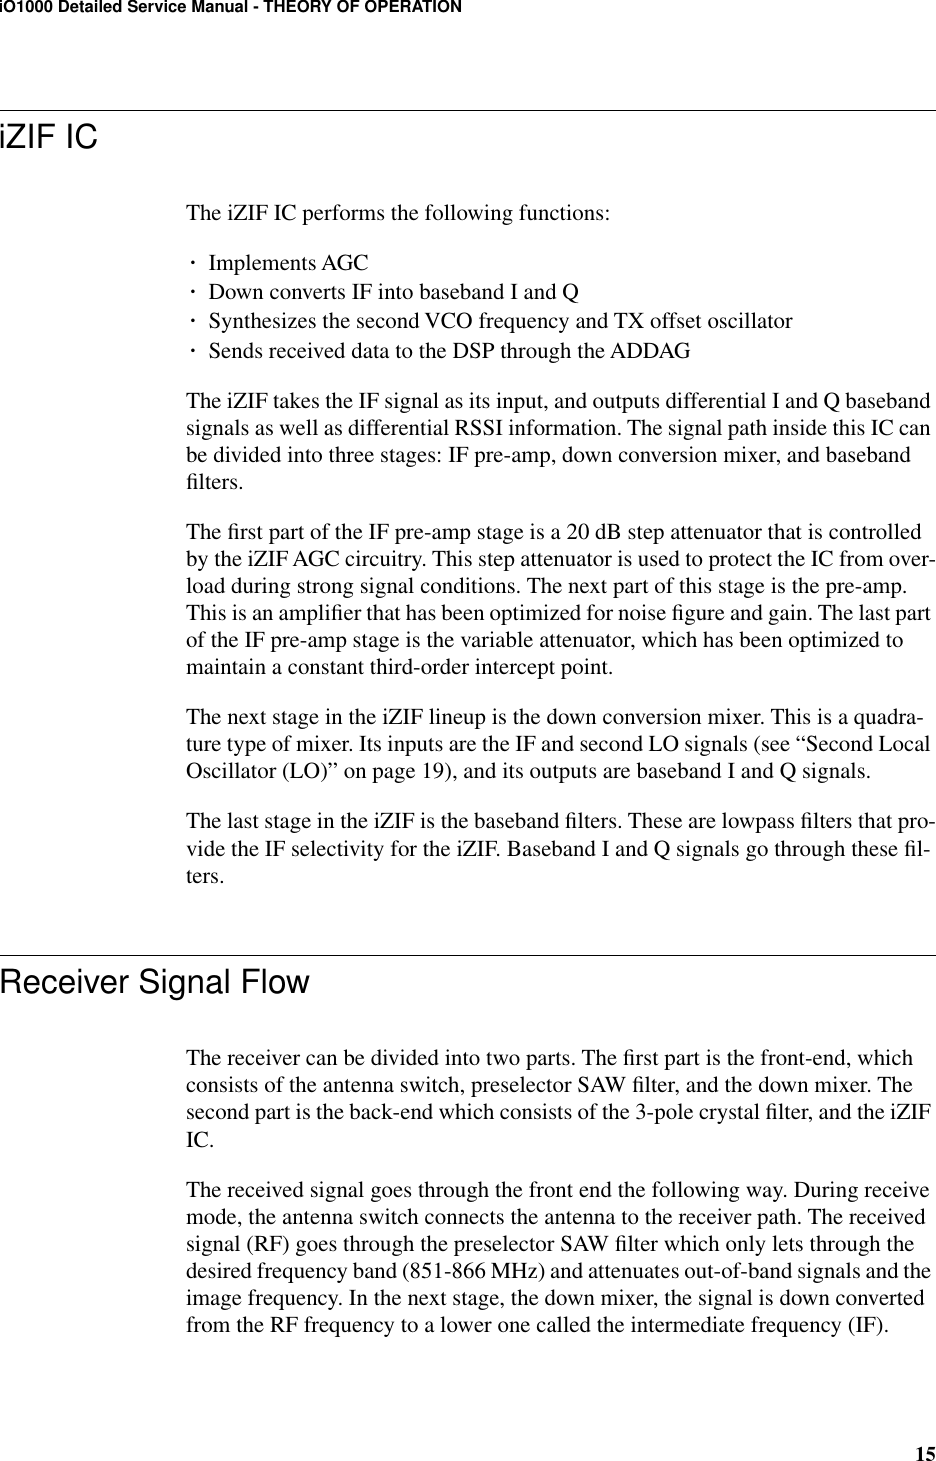 15iO1000 Detailed Service Manual - THEORY OF OPERATIONiZIF ICThe iZIF IC performs the following functions:¥Implements AGC¥Down converts IF into baseband I and Q¥Synthesizes the second VCO frequency and TX offset oscillator¥Sends received data to the DSP through the ADDAGThe iZIF takes the IF signal as its input, and outputs differential I and Q baseband signals as well as differential RSSI information. The signal path inside this IC can be divided into three stages: IF pre-amp, down conversion mixer, and baseband ﬁlters.The ﬁrst part of the IF pre-amp stage is a 20 dB step attenuator that is controlled by the iZIF AGC circuitry. This step attenuator is used to protect the IC from over-load during strong signal conditions. The next part of this stage is the pre-amp. This is an ampliﬁer that has been optimized for noise ﬁgure and gain. The last part of the IF pre-amp stage is the variable attenuator, which has been optimized to maintain a constant third-order intercept point.The next stage in the iZIF lineup is the down conversion mixer. This is a quadra-ture type of mixer. Its inputs are the IF and second LO signals (see “Second Local Oscillator (LO)” on page 19), and its outputs are baseband I and Q signals. The last stage in the iZIF is the baseband ﬁlters. These are lowpass ﬁlters that pro-vide the IF selectivity for the iZIF. Baseband I and Q signals go through these ﬁl-ters.Receiver Signal FlowThe receiver can be divided into two parts. The ﬁrst part is the front-end, which consists of the antenna switch, preselector SAW ﬁlter, and the down mixer. The second part is the back-end which consists of the 3-pole crystal ﬁlter, and the iZIF IC.The received signal goes through the front end the following way. During receive mode, the antenna switch connects the antenna to the receiver path. The received signal (RF) goes through the preselector SAW ﬁlter which only lets through the desired frequency band (851-866 MHz) and attenuates out-of-band signals and the image frequency. In the next stage, the down mixer, the signal is down converted from the RF frequency to a lower one called the intermediate frequency (IF).